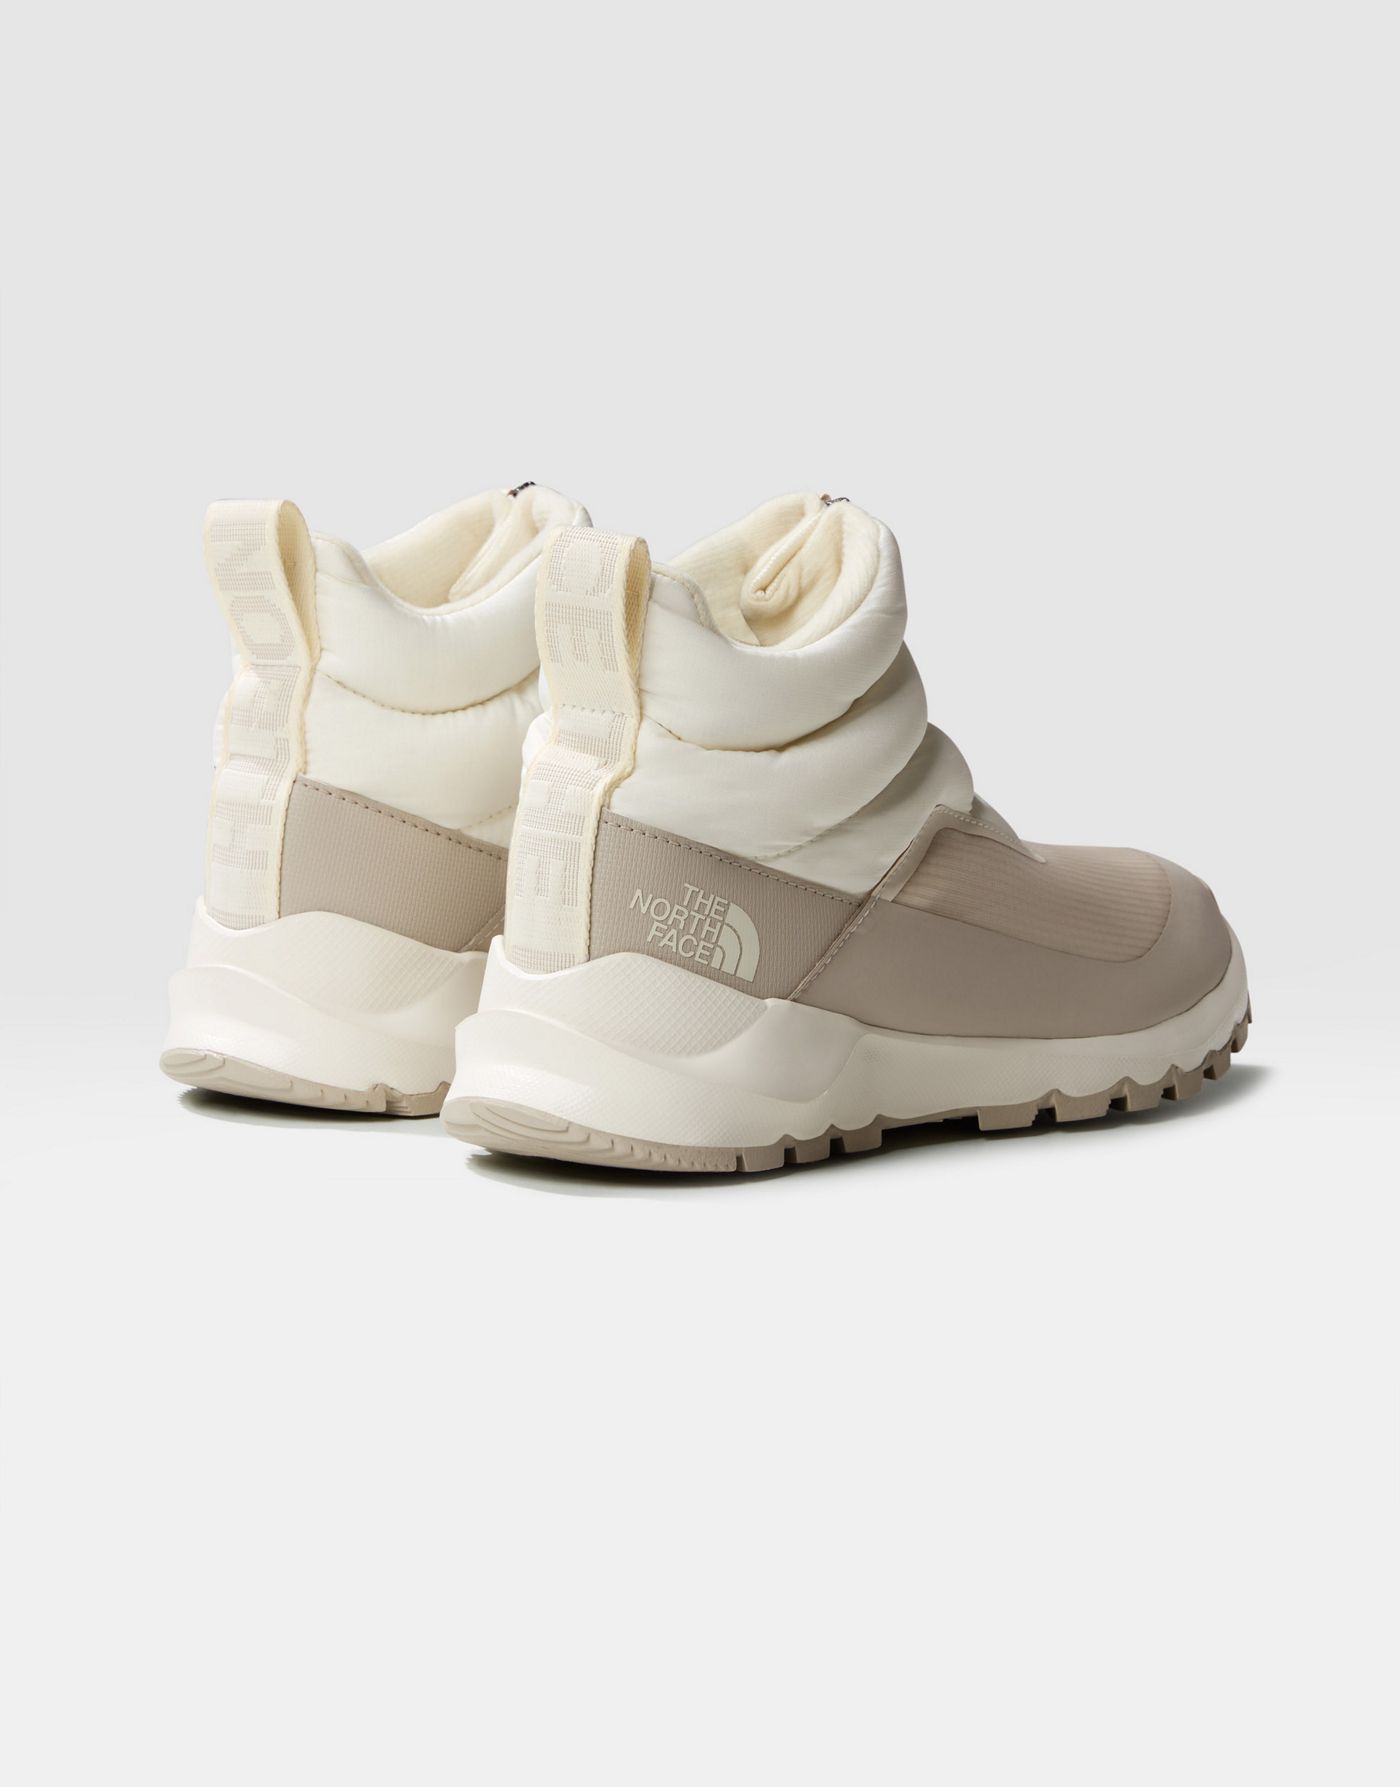 The North Face Thermoball™ progressive ii waterproof zip-up winter boots in gardenia white/silver grey